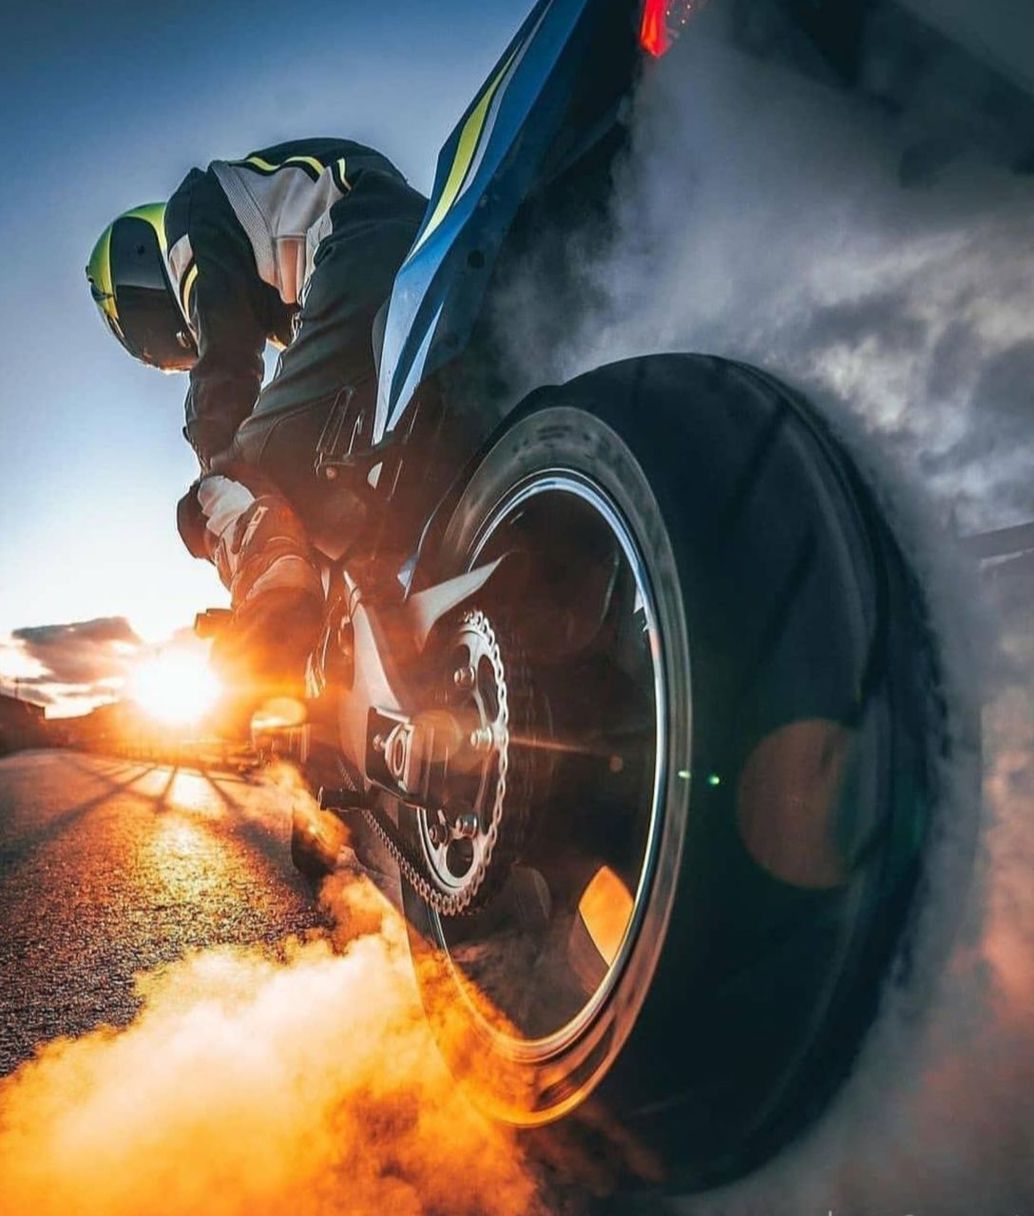 sports, stunt performer, one person, transportation, adult, motion, sports helmet, headwear, helmet, tire, speed, vehicle, wheel, mode of transportation, sky, men, nature, auto part, competition, sports equipment, smoke, activity, motorcycle, extreme sports, blurred motion, warning sign, occupation, screenshot, skill, sign, sports race, burning, lens flare, land vehicle